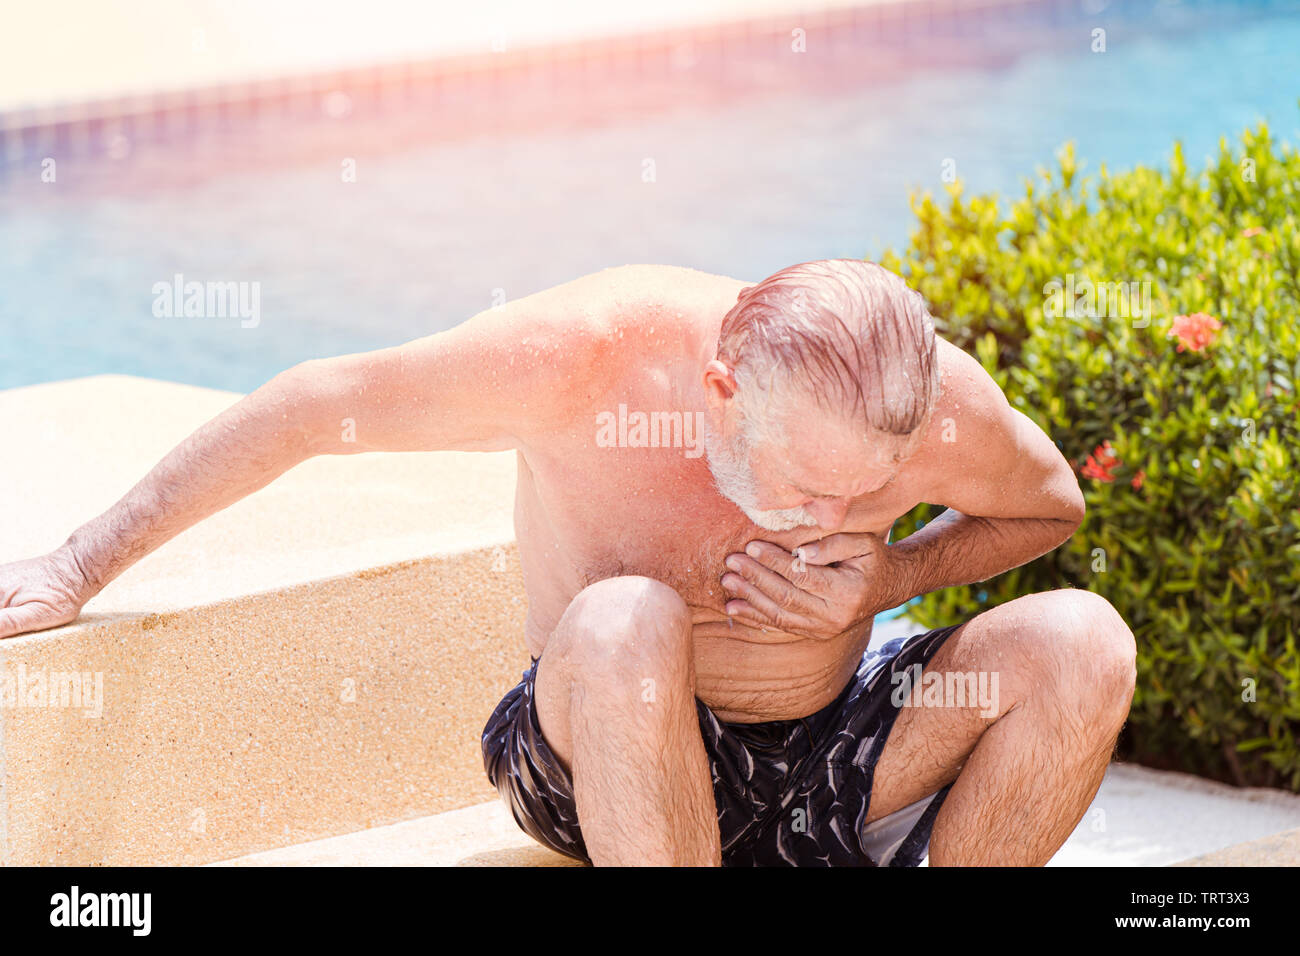 Elder pain suffer from heart attack at swimming pool in summer hot sunny day Stock Photo